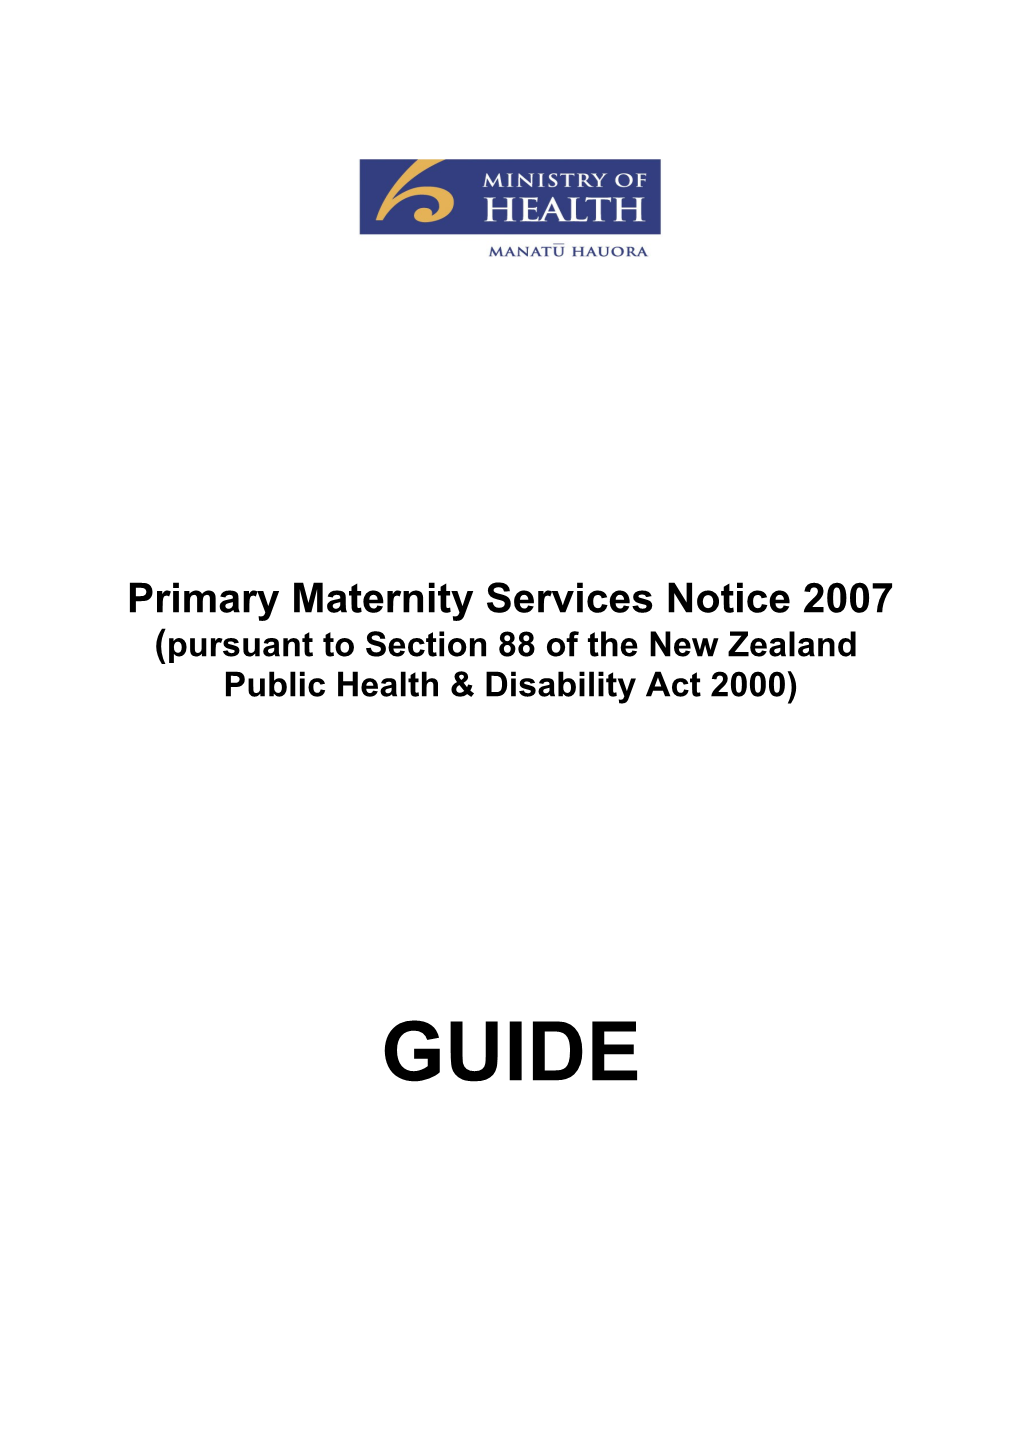 Primary Maternity Services Notice 2007(Pursuant to Section 88 of the New Zealand